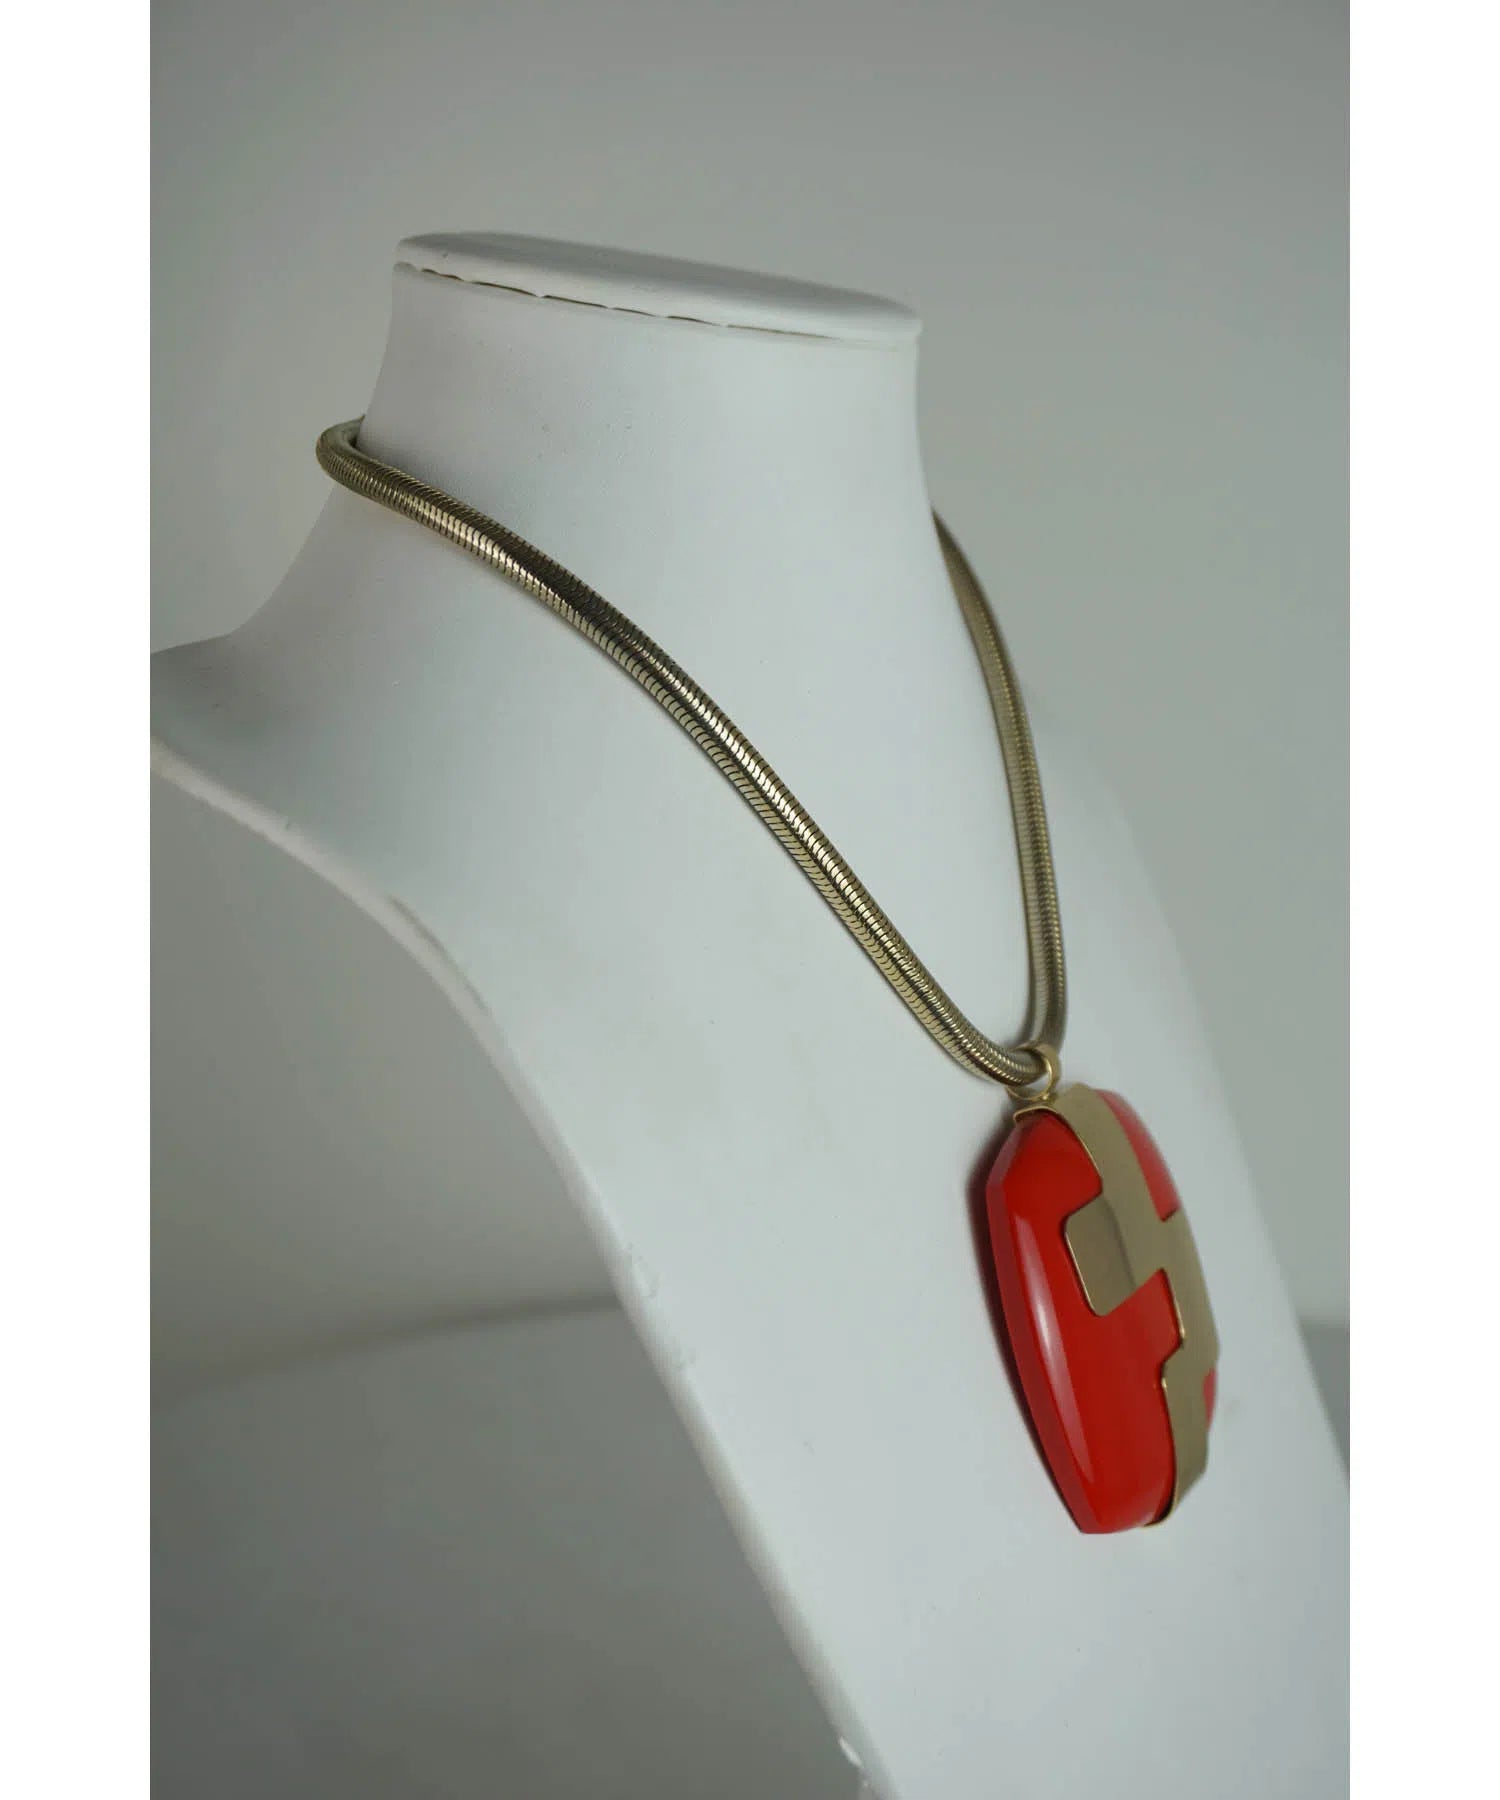 Lanvin Vintage Red and Gold Mod Necklace 1960's